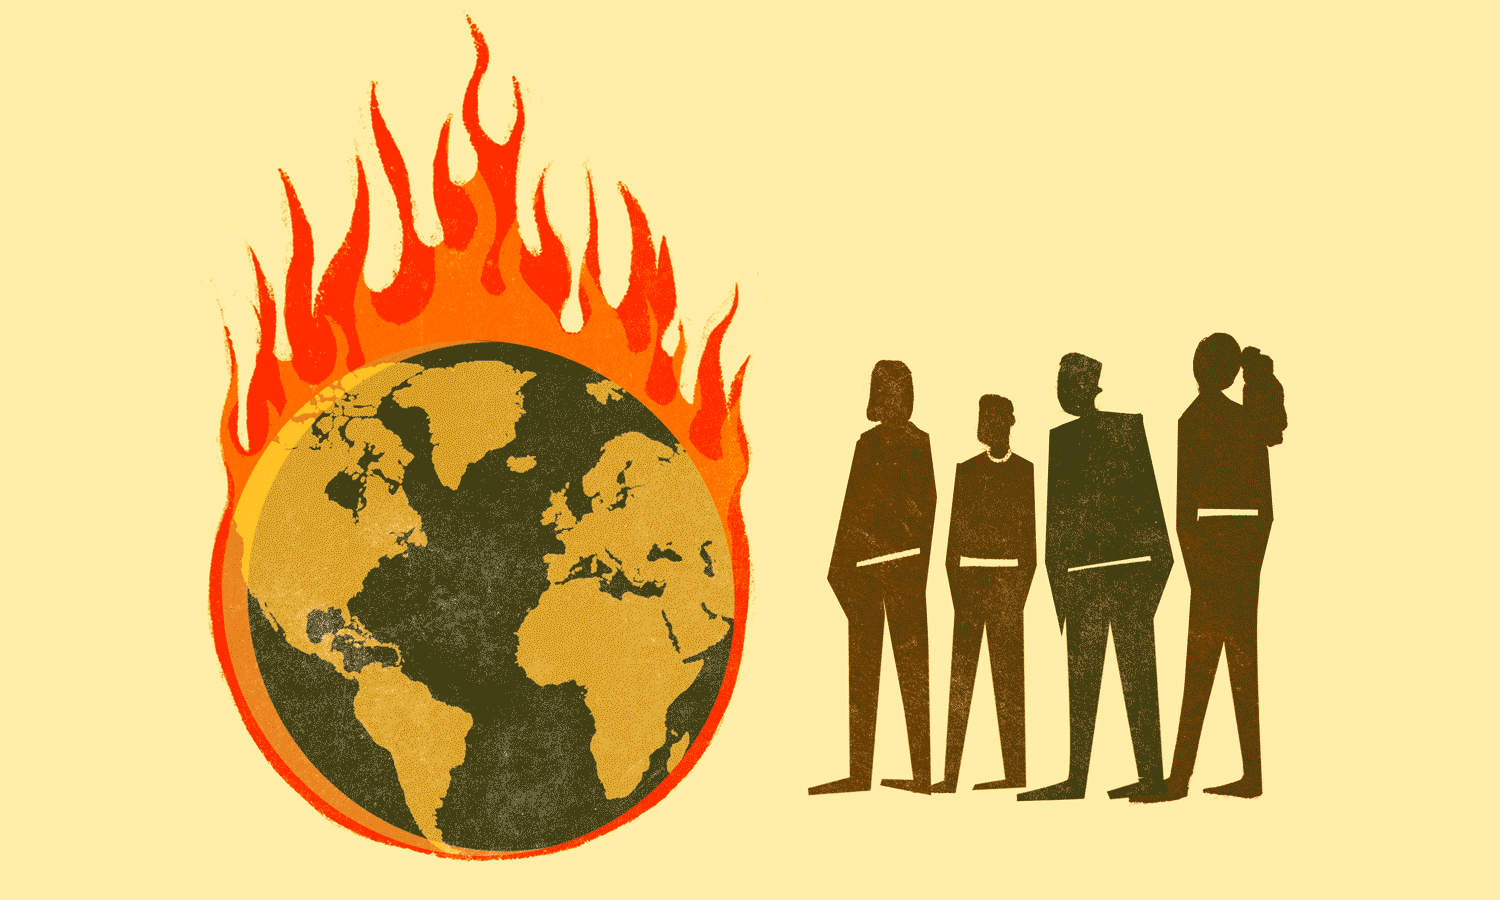 Because we burn so much coal and gas and oil, the atmosphere of our world is changing rapidly, and that atmospheric change is producing record heat. (Photo: YES! illustration by Jennifer Luxton)